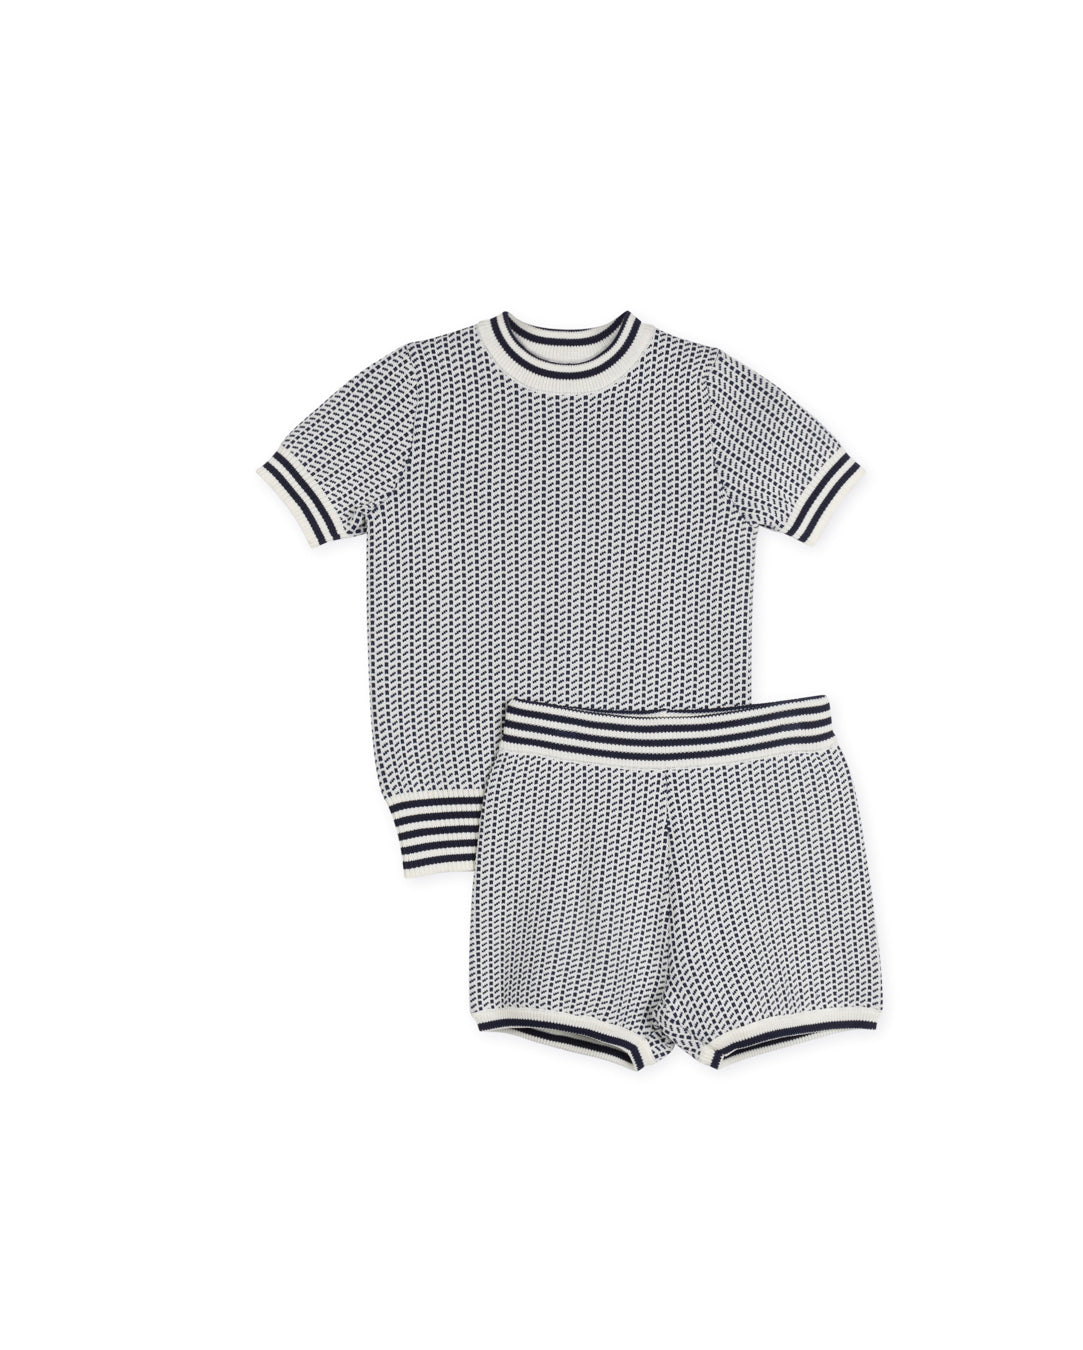 HARPER JAMES NAVY KNIT STRIPED TRIMMING SWEATER AND SHORTS SET